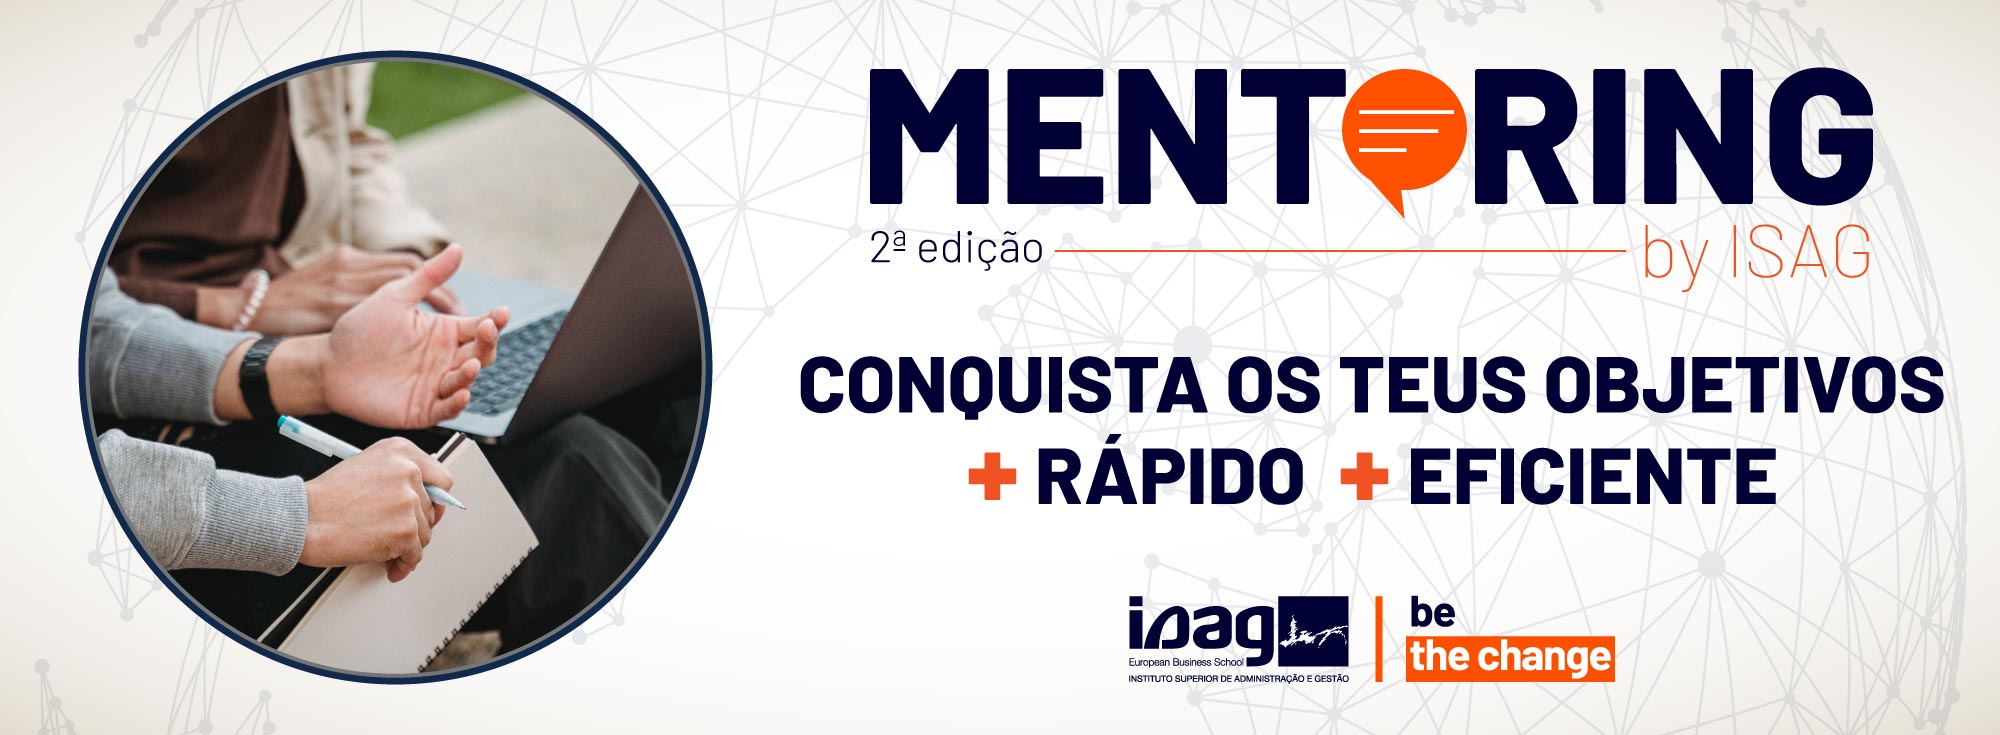 Mentoring by ISAG